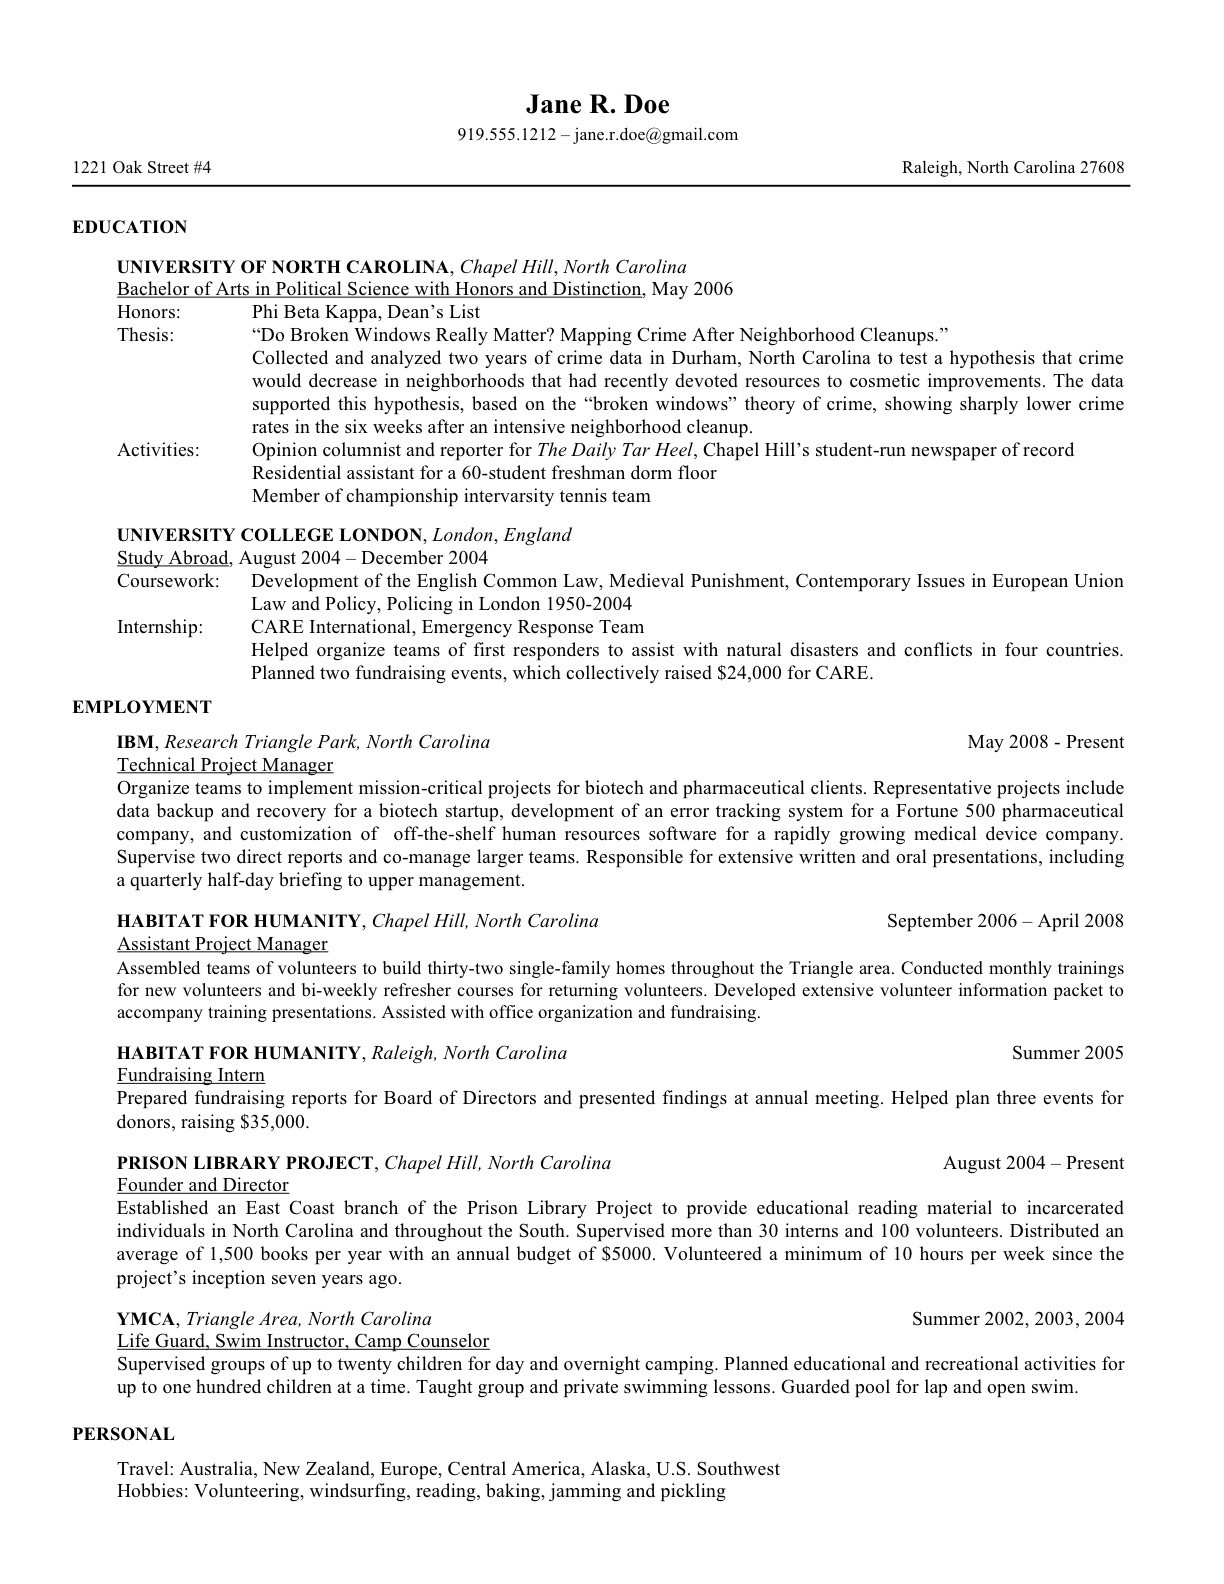 Second Year Law Student Resume Sample 5 Law School Resume Templates: Prepping Your Resume for Law School …